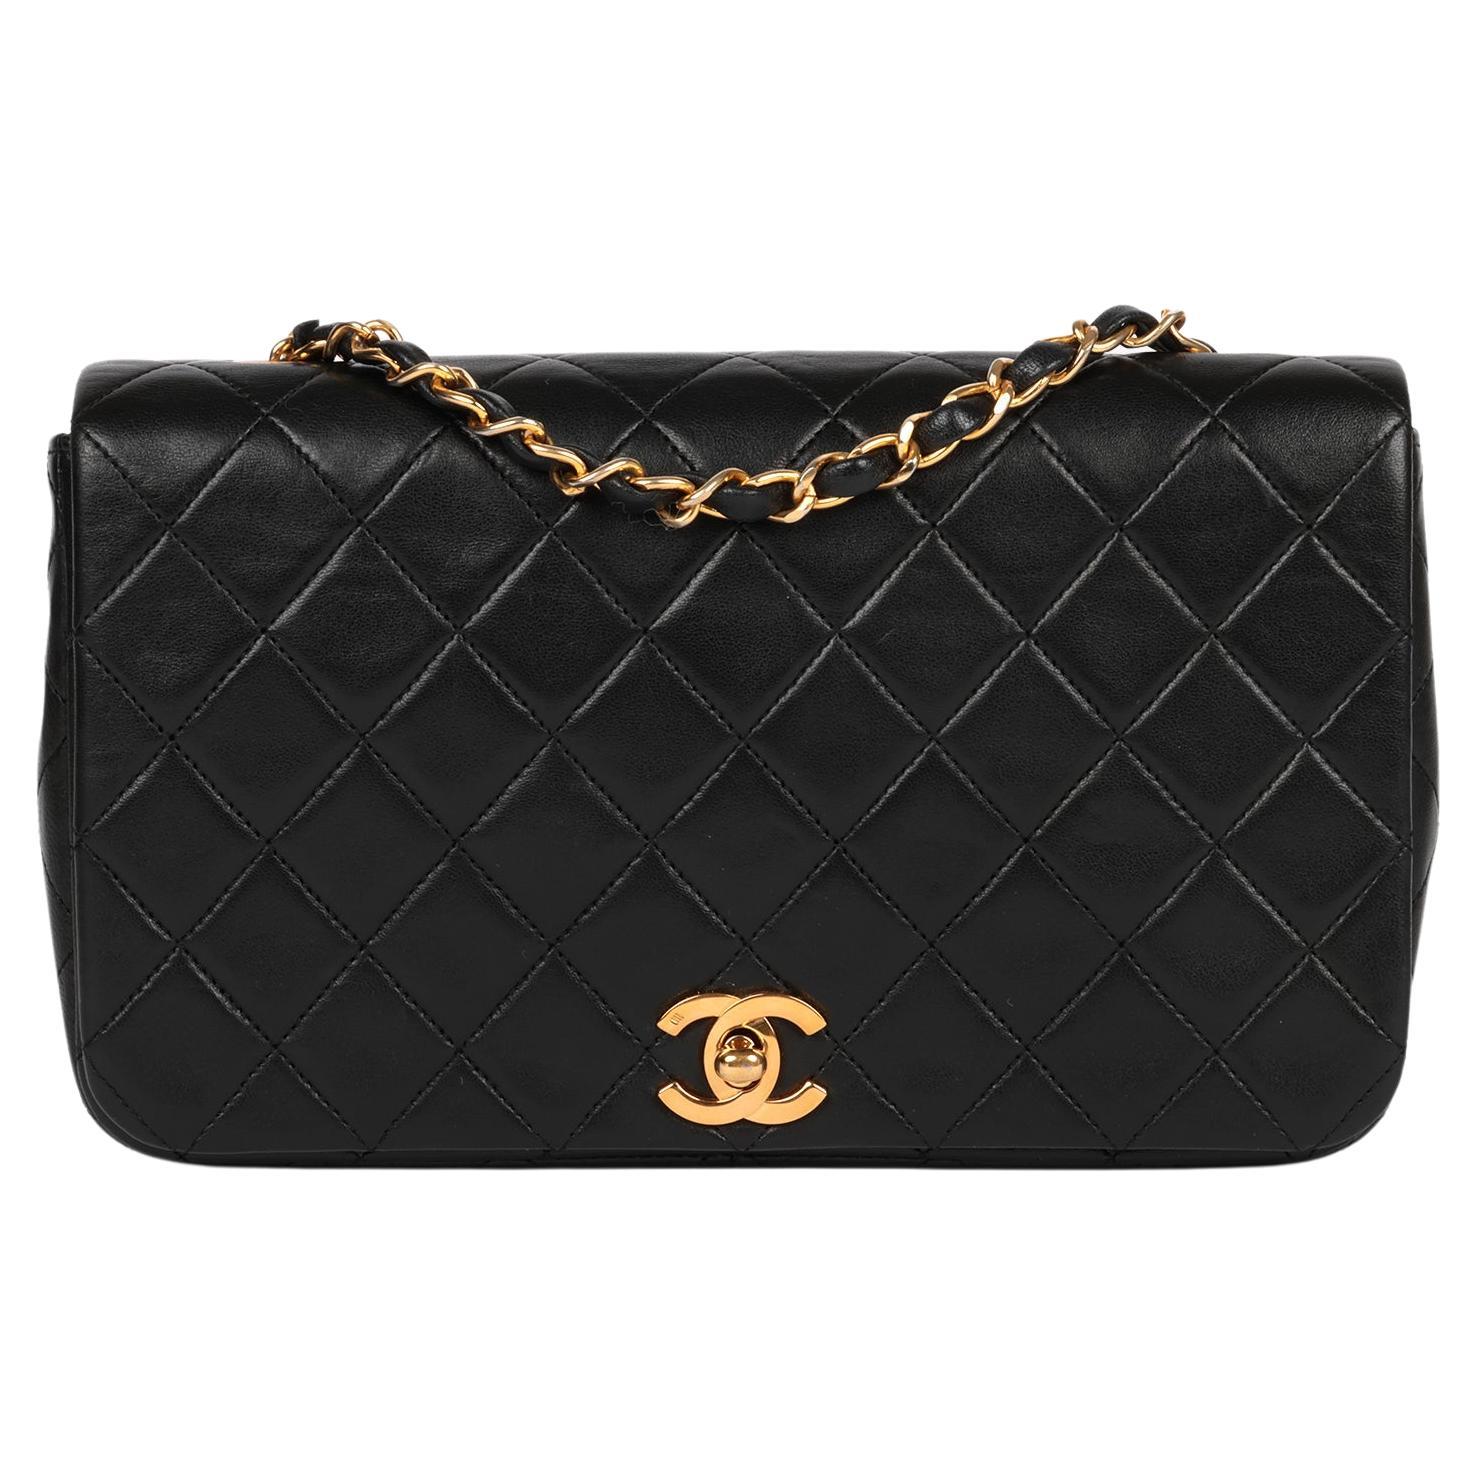 What was the first Chanel bag?